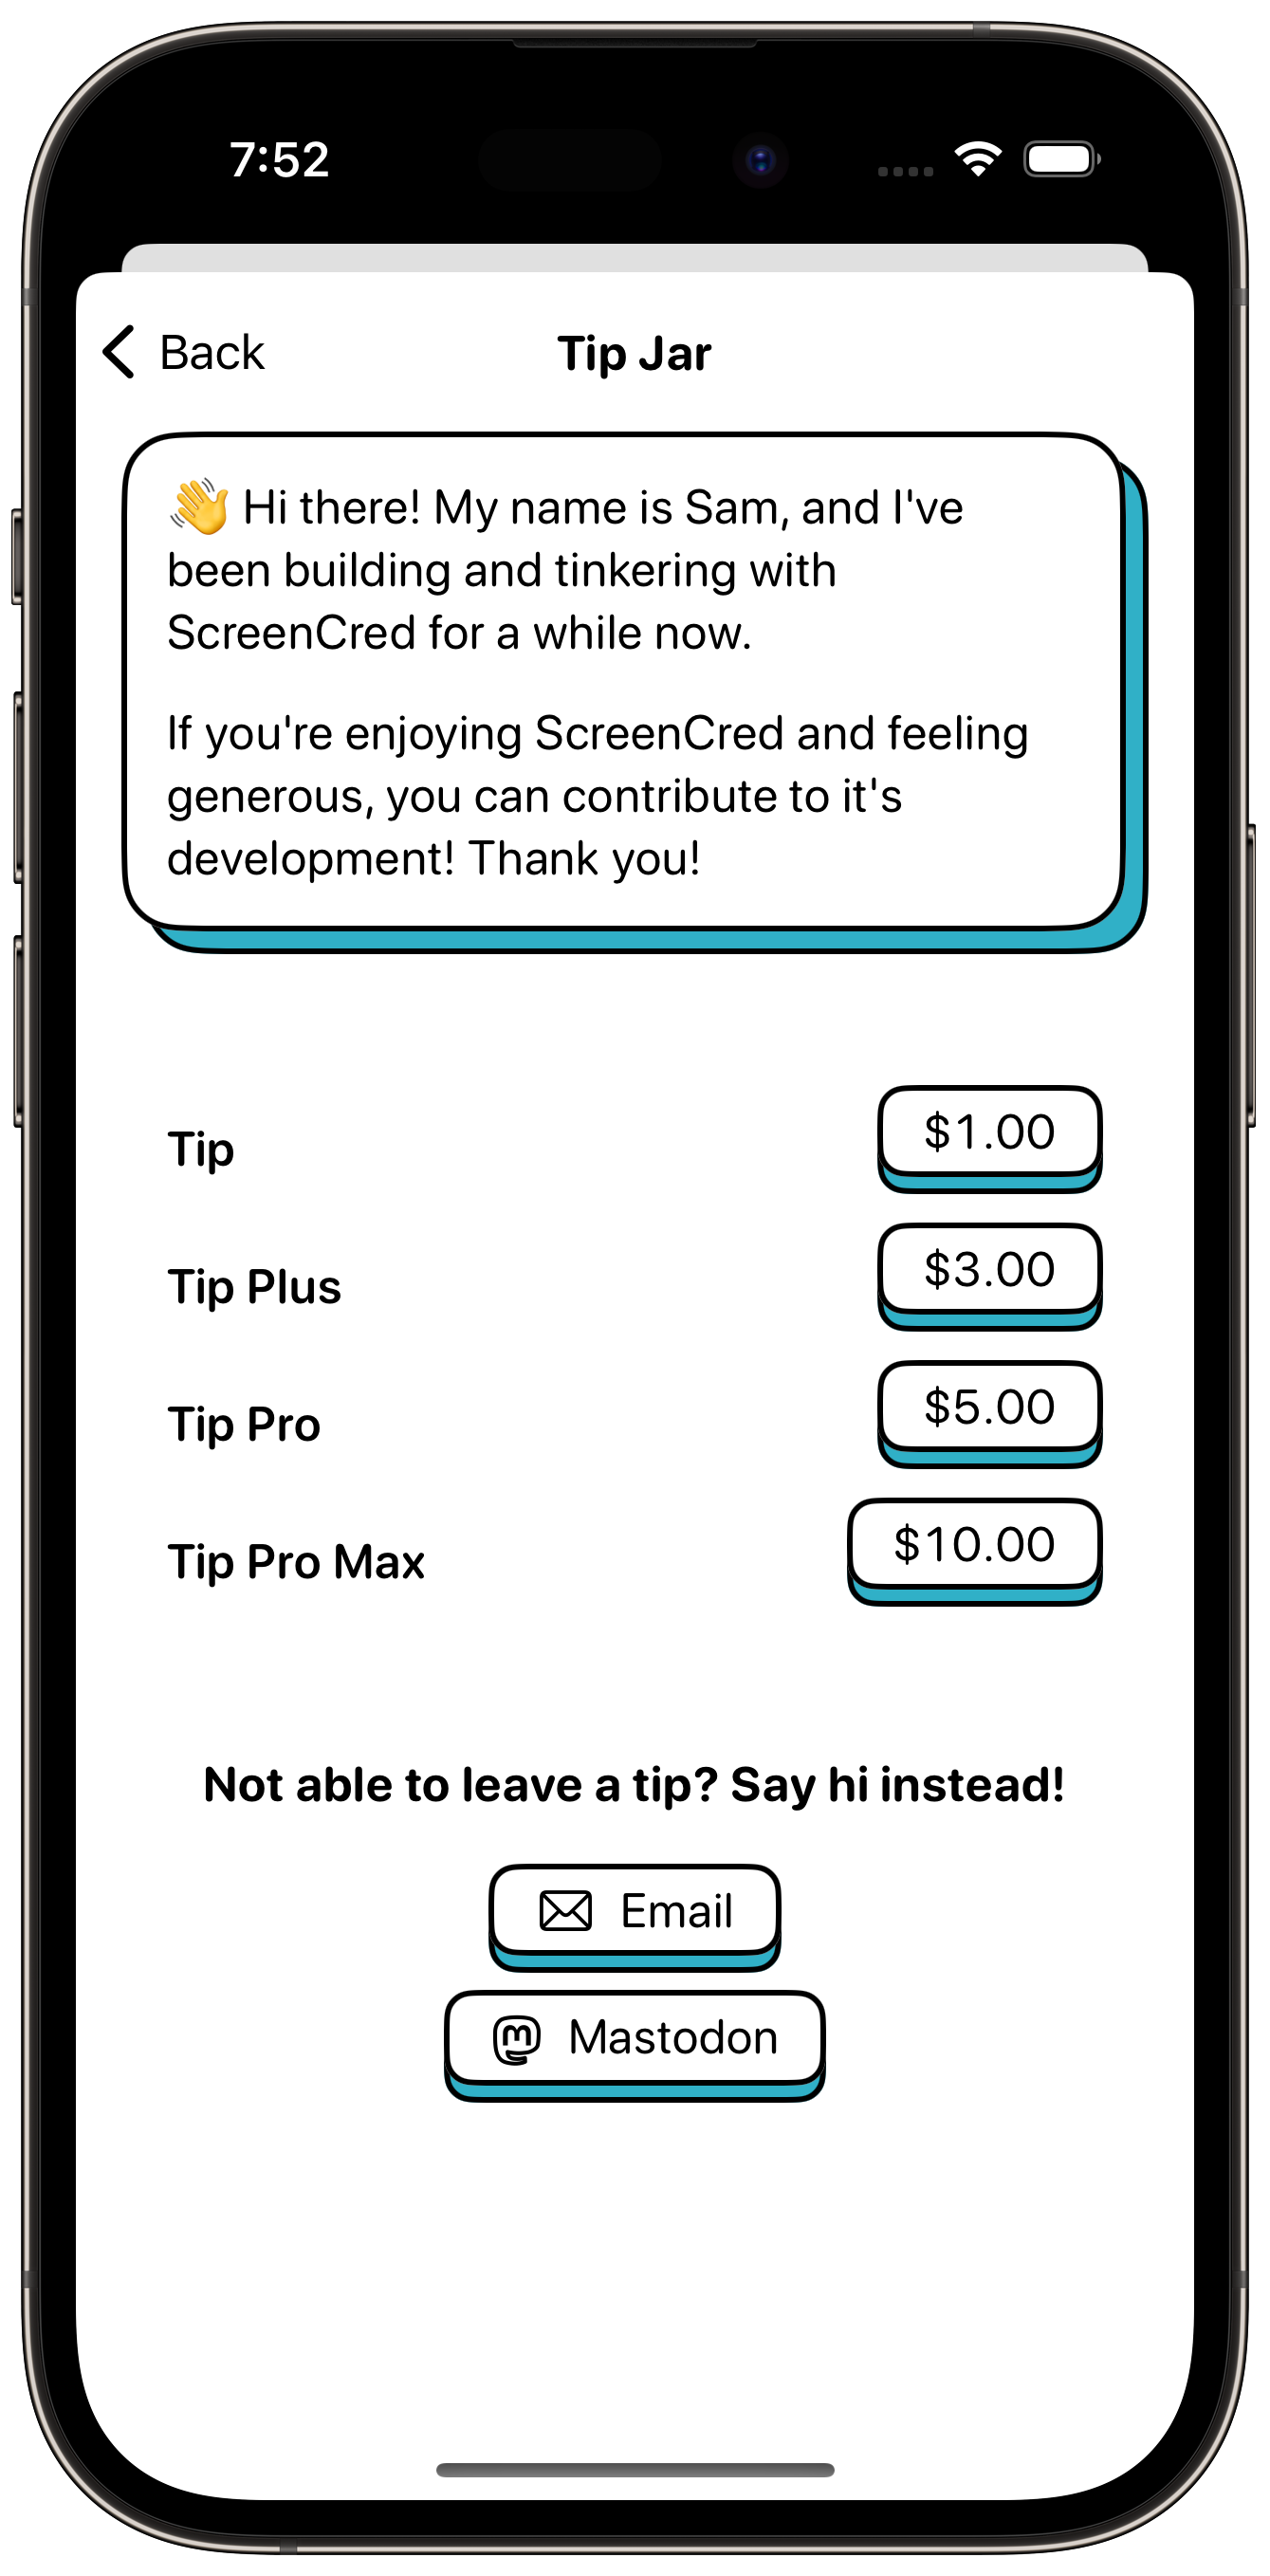 Screenshot of ScreenCred showing a tip jar view with 4 tip options. $1, $3, $5, and $10.